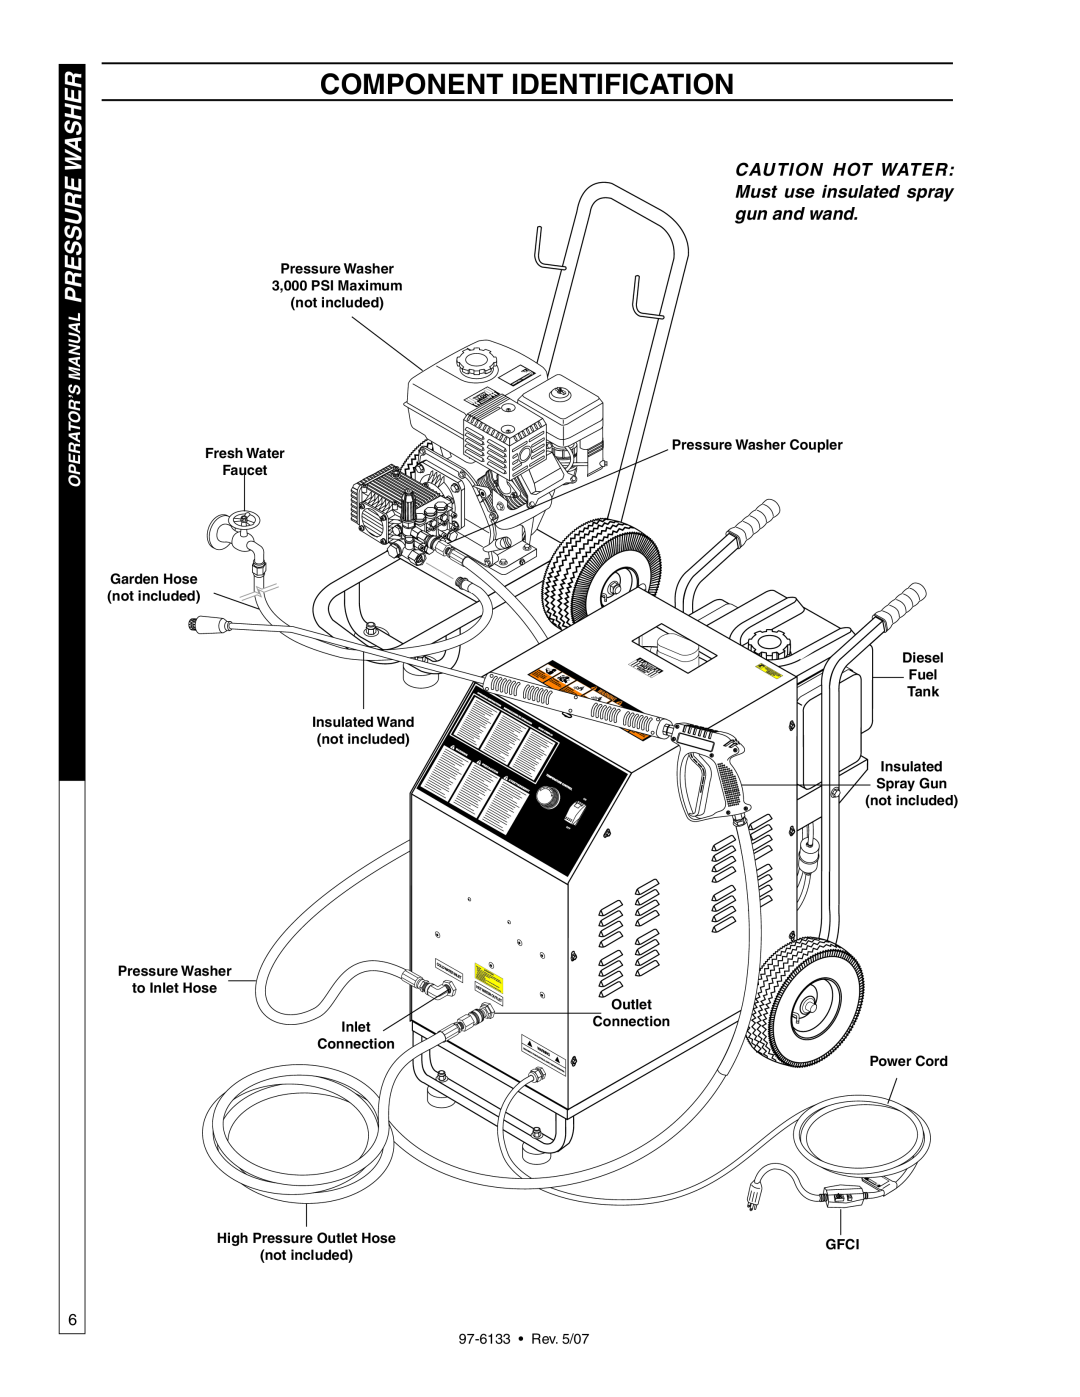 Shark HP-5030D Component Identification, Operator’S Manual, Pressure Washer Coupler, Diesel Fuel Tank, Power Cord 